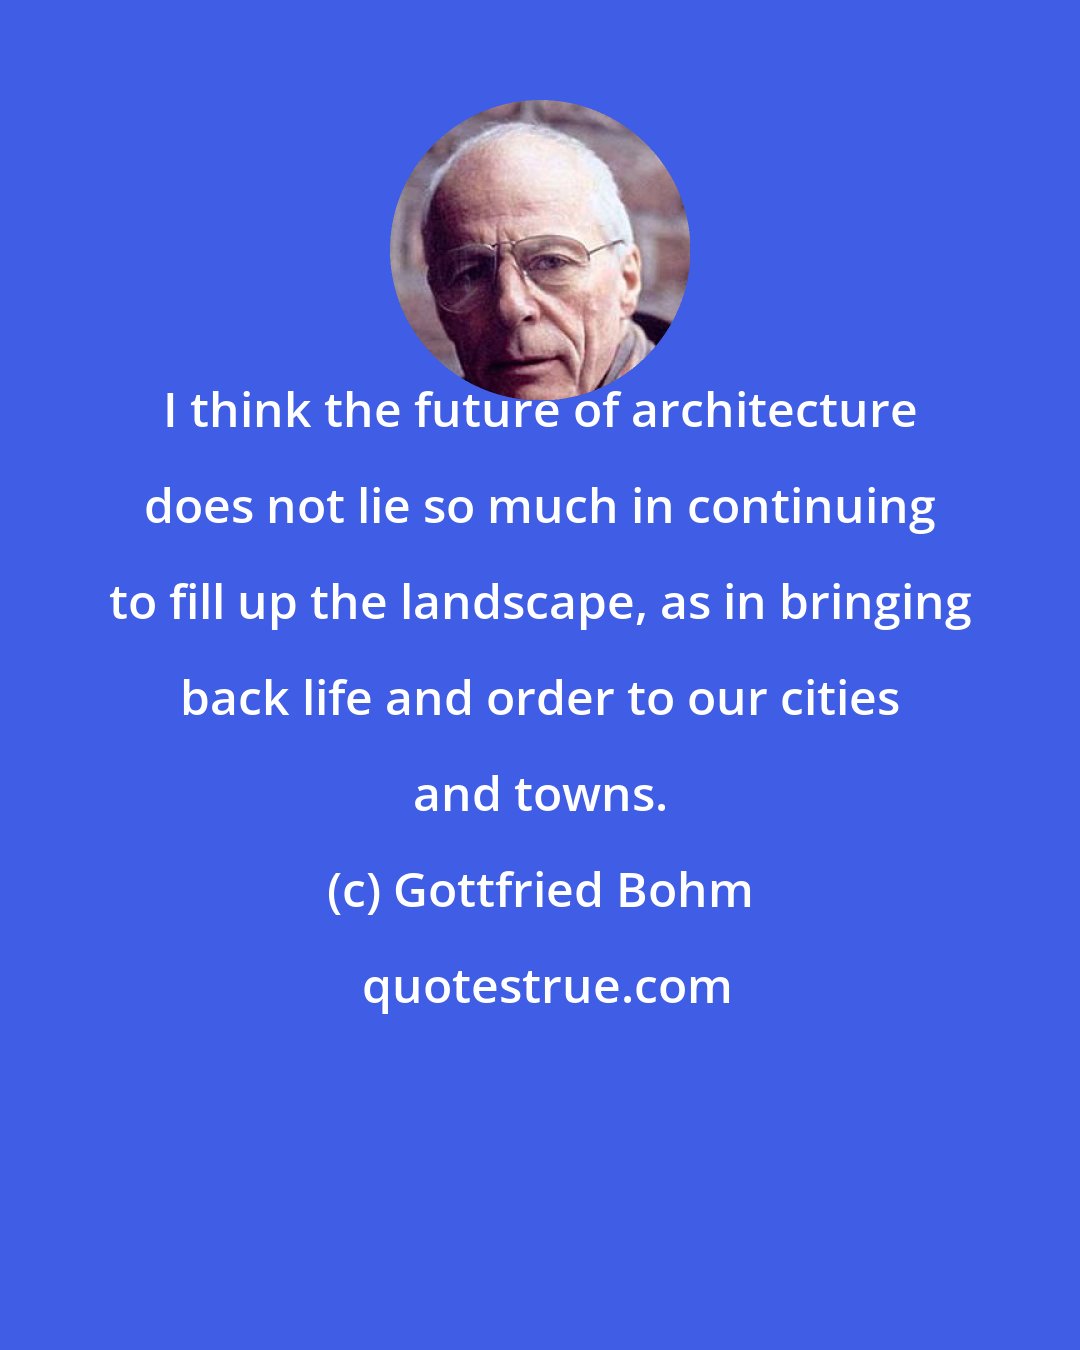 Gottfried Bohm: I think the future of architecture does not lie so much in continuing to fill up the landscape, as in bringing back life and order to our cities and towns.